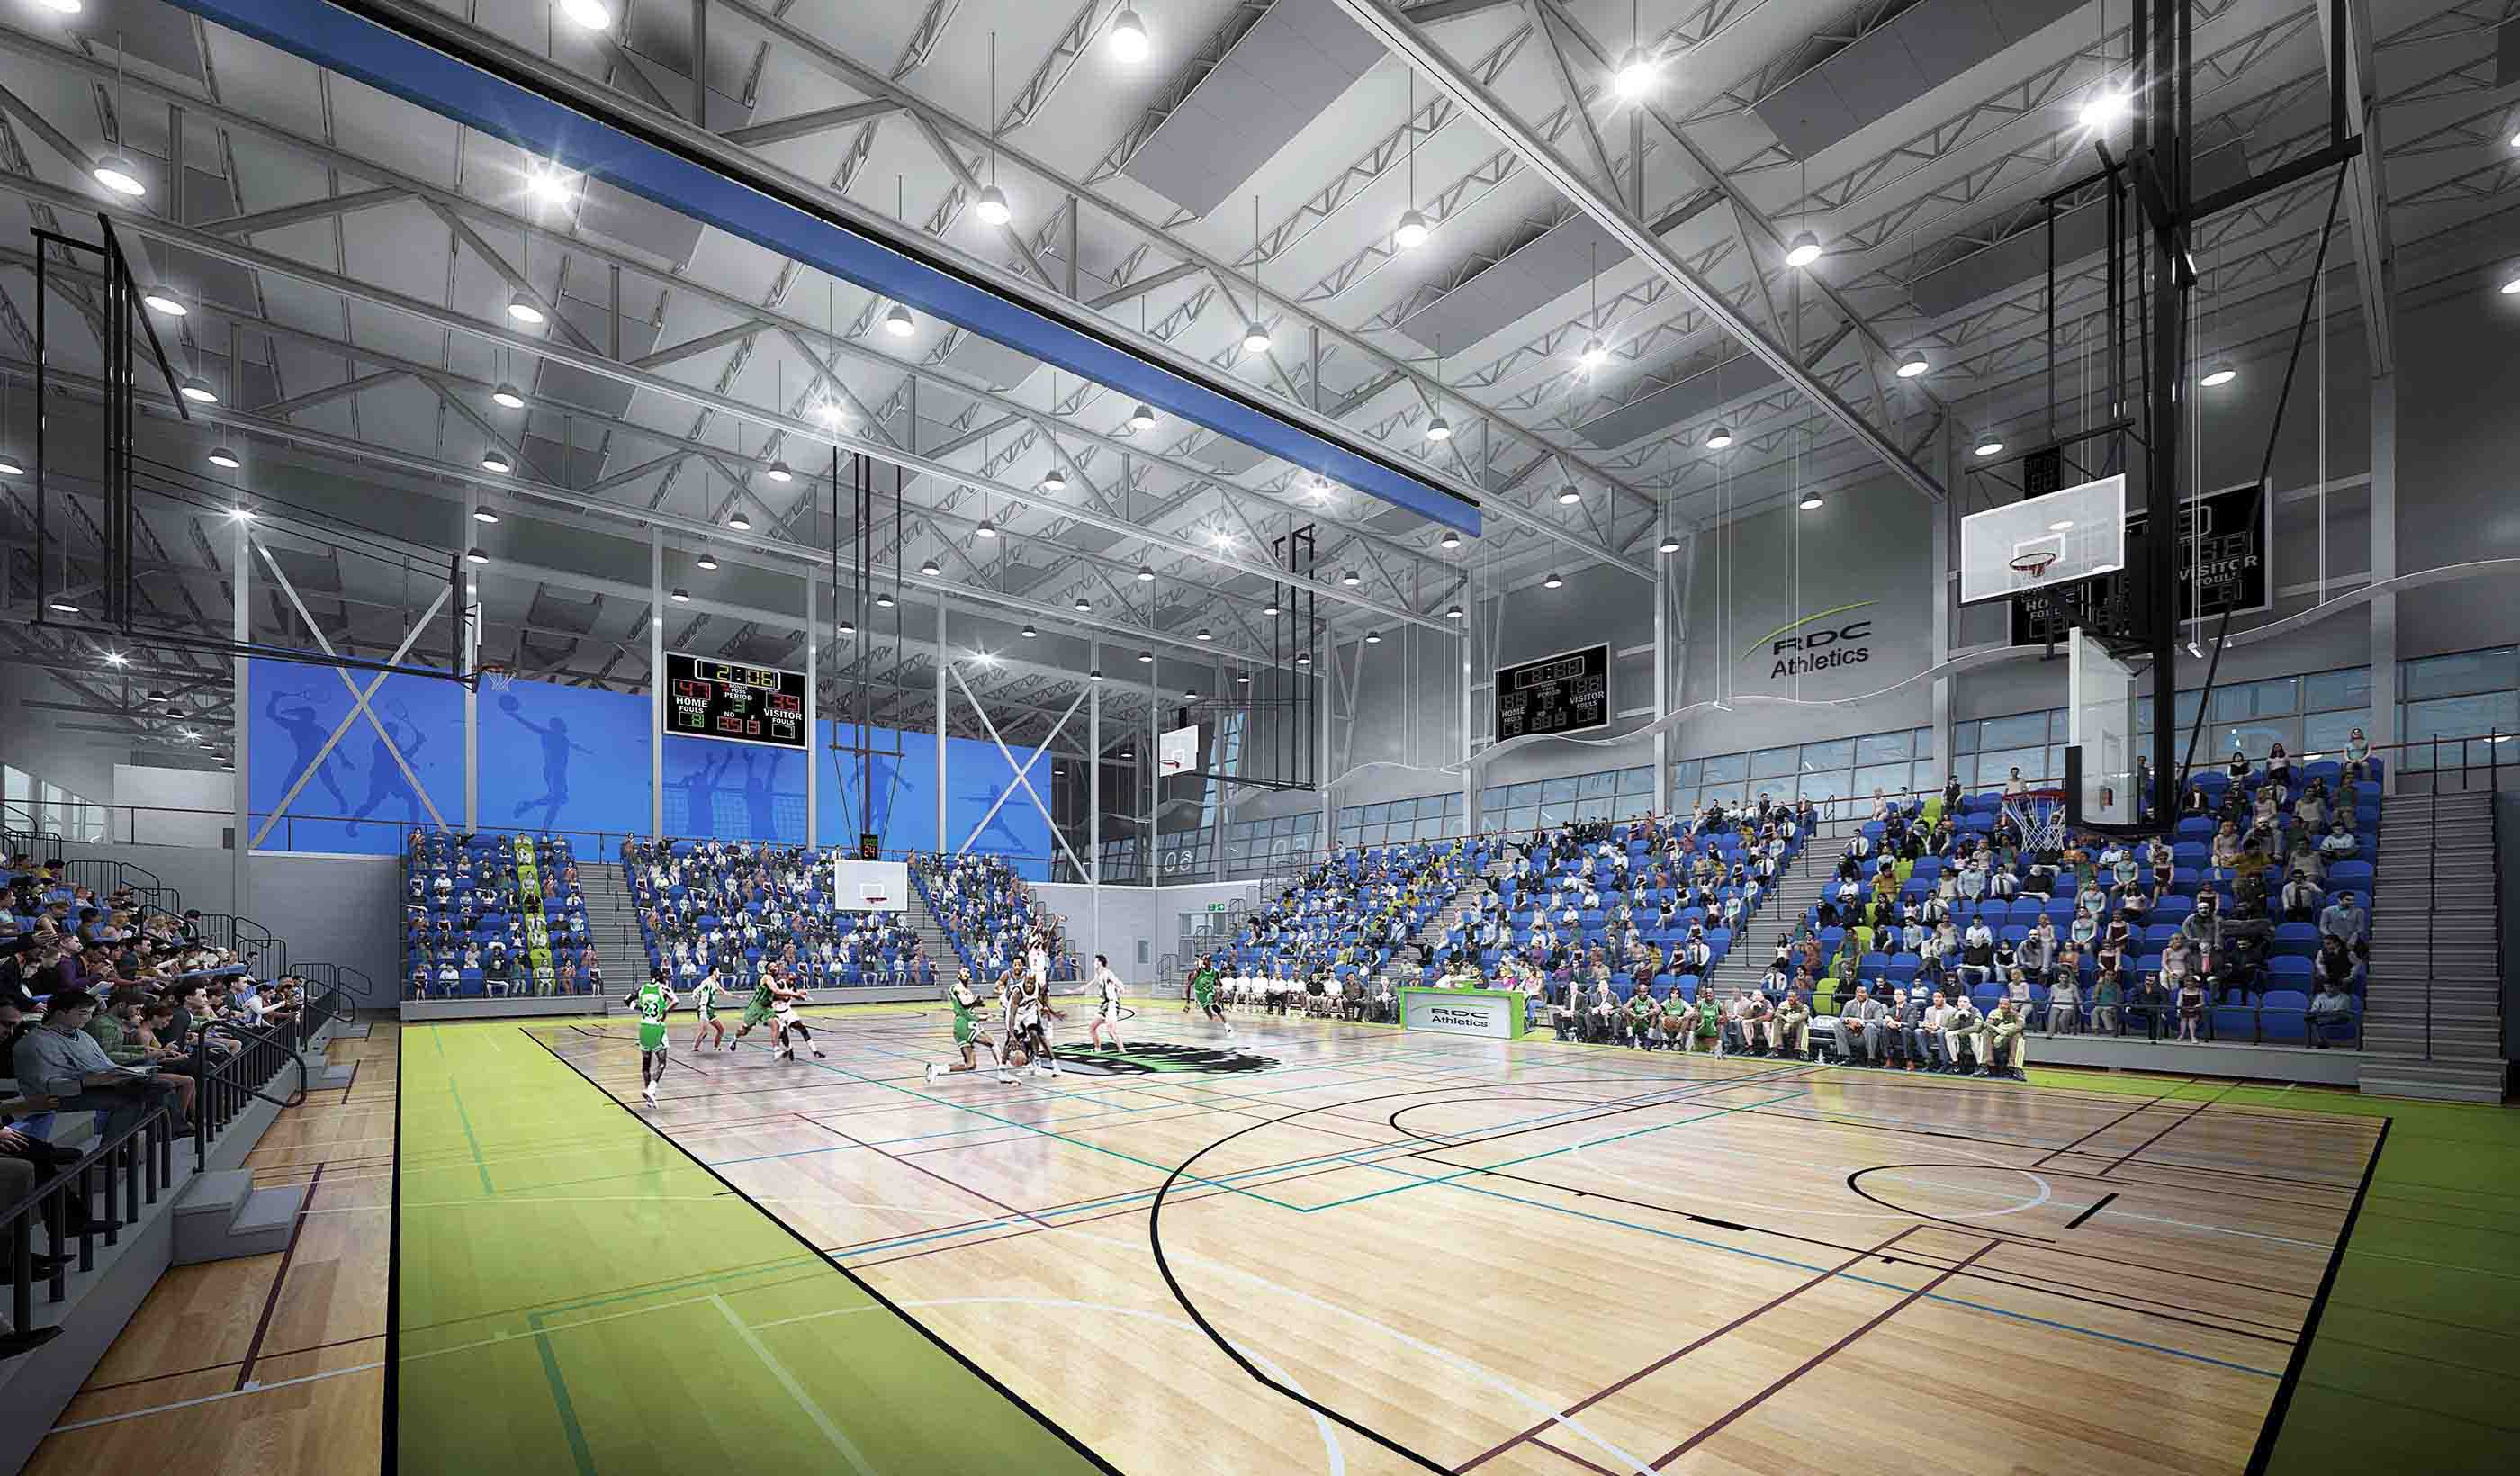 Building a legacy: Designing sports facilities that serve